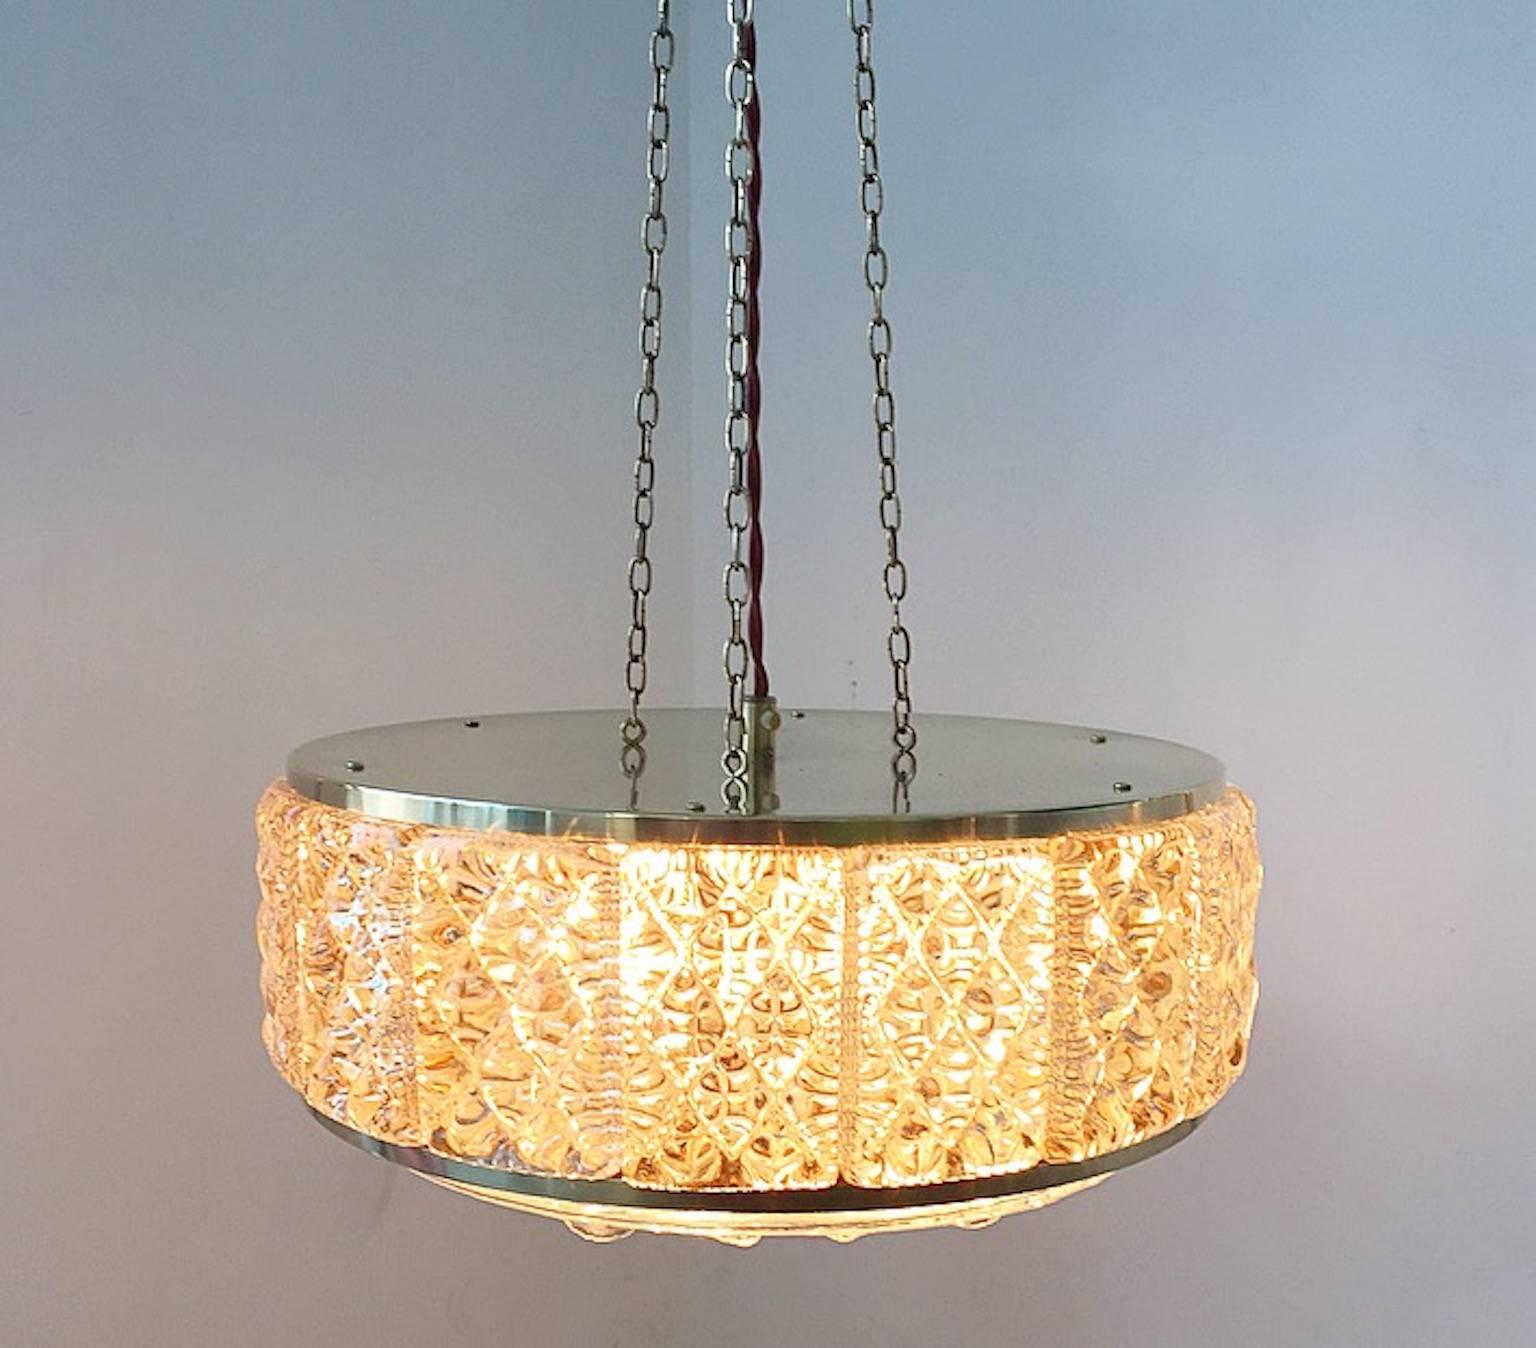 Stunning glass chandelier by Danish Vitrika in collaboration with swedish glass manufactor Orrefors.

This chandelier is of a high built quality as you would expect from a danish lighting manufactor.

The chandelier consists of 16 individual